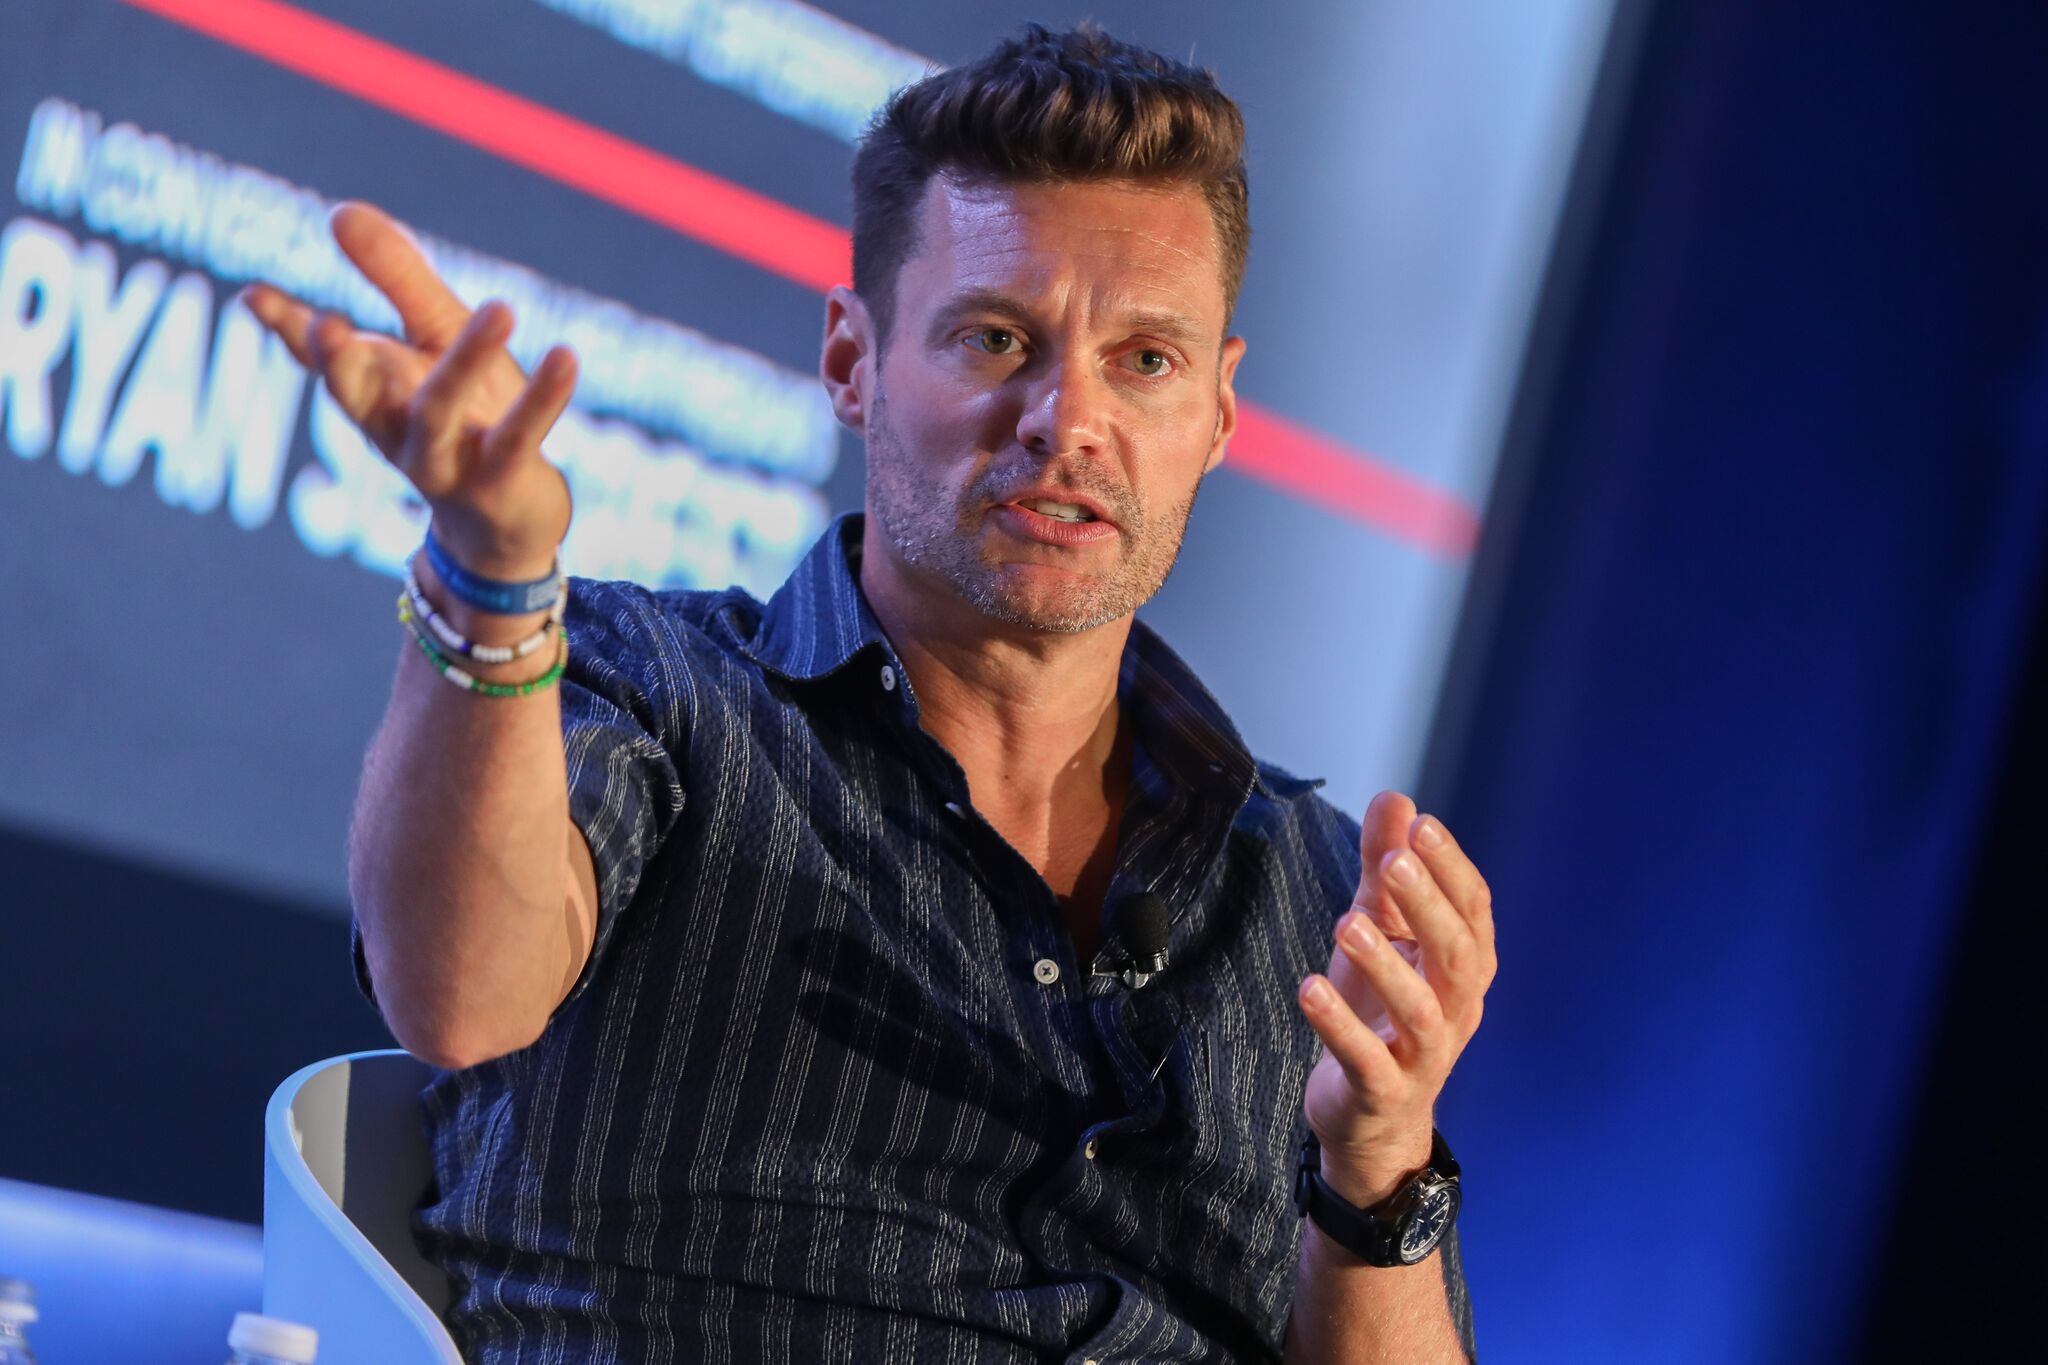  Ryan Seacrest attends iHeartMedia's fireside chat about "The Art of Collaboration - Building Brands through Sound" | Getty Images